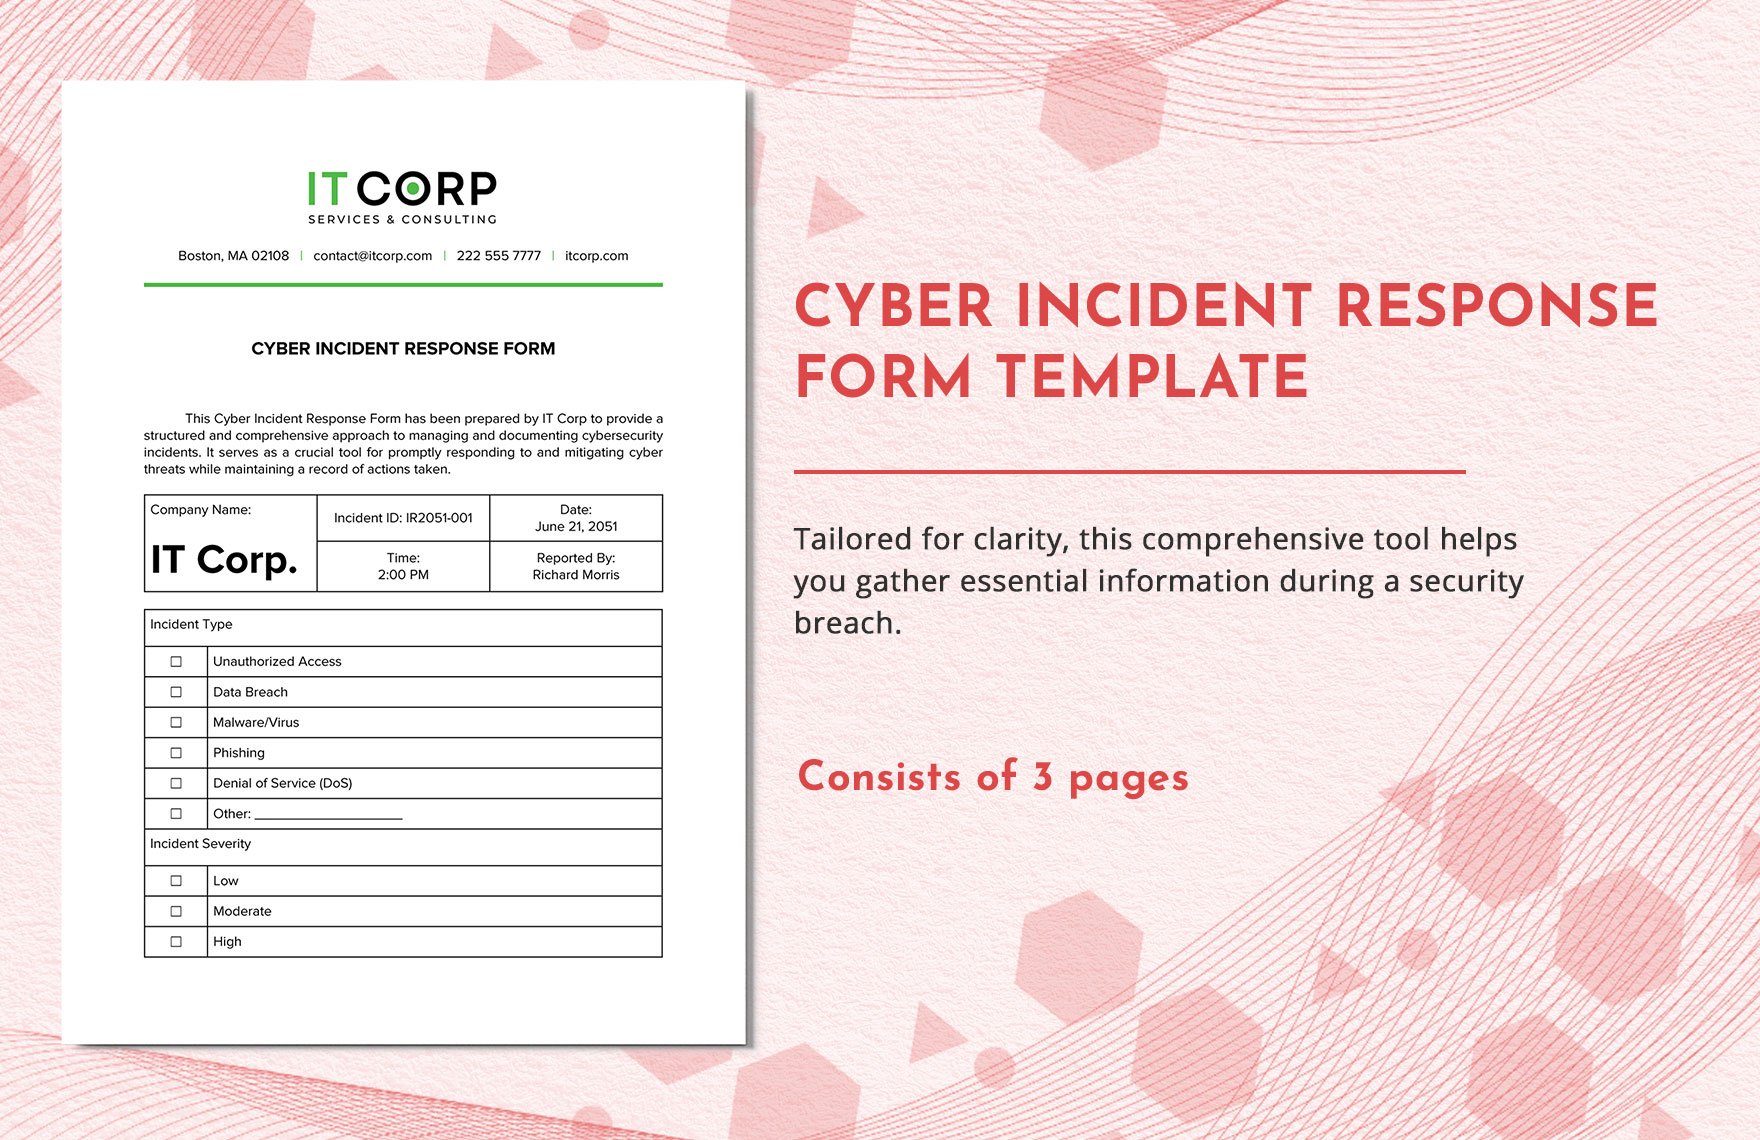 Cyber Incident Response Form Template in Word, Google Docs, PDF